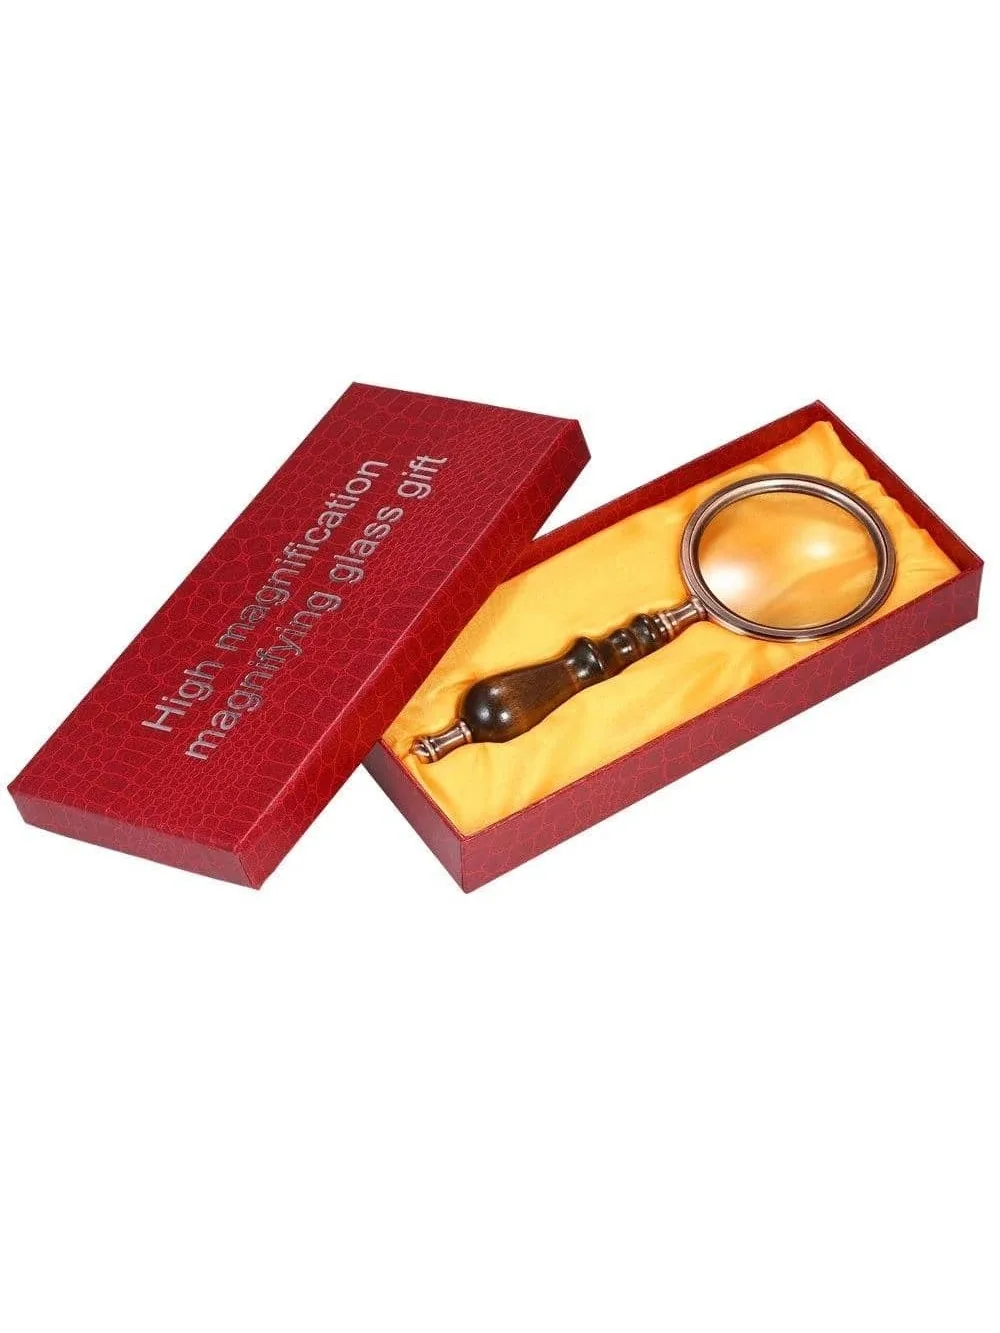 

Handheld Magnifier 10X Reading Magnifying Glass Portable Jewelry Antique Loupe with High Magnification Power Lens